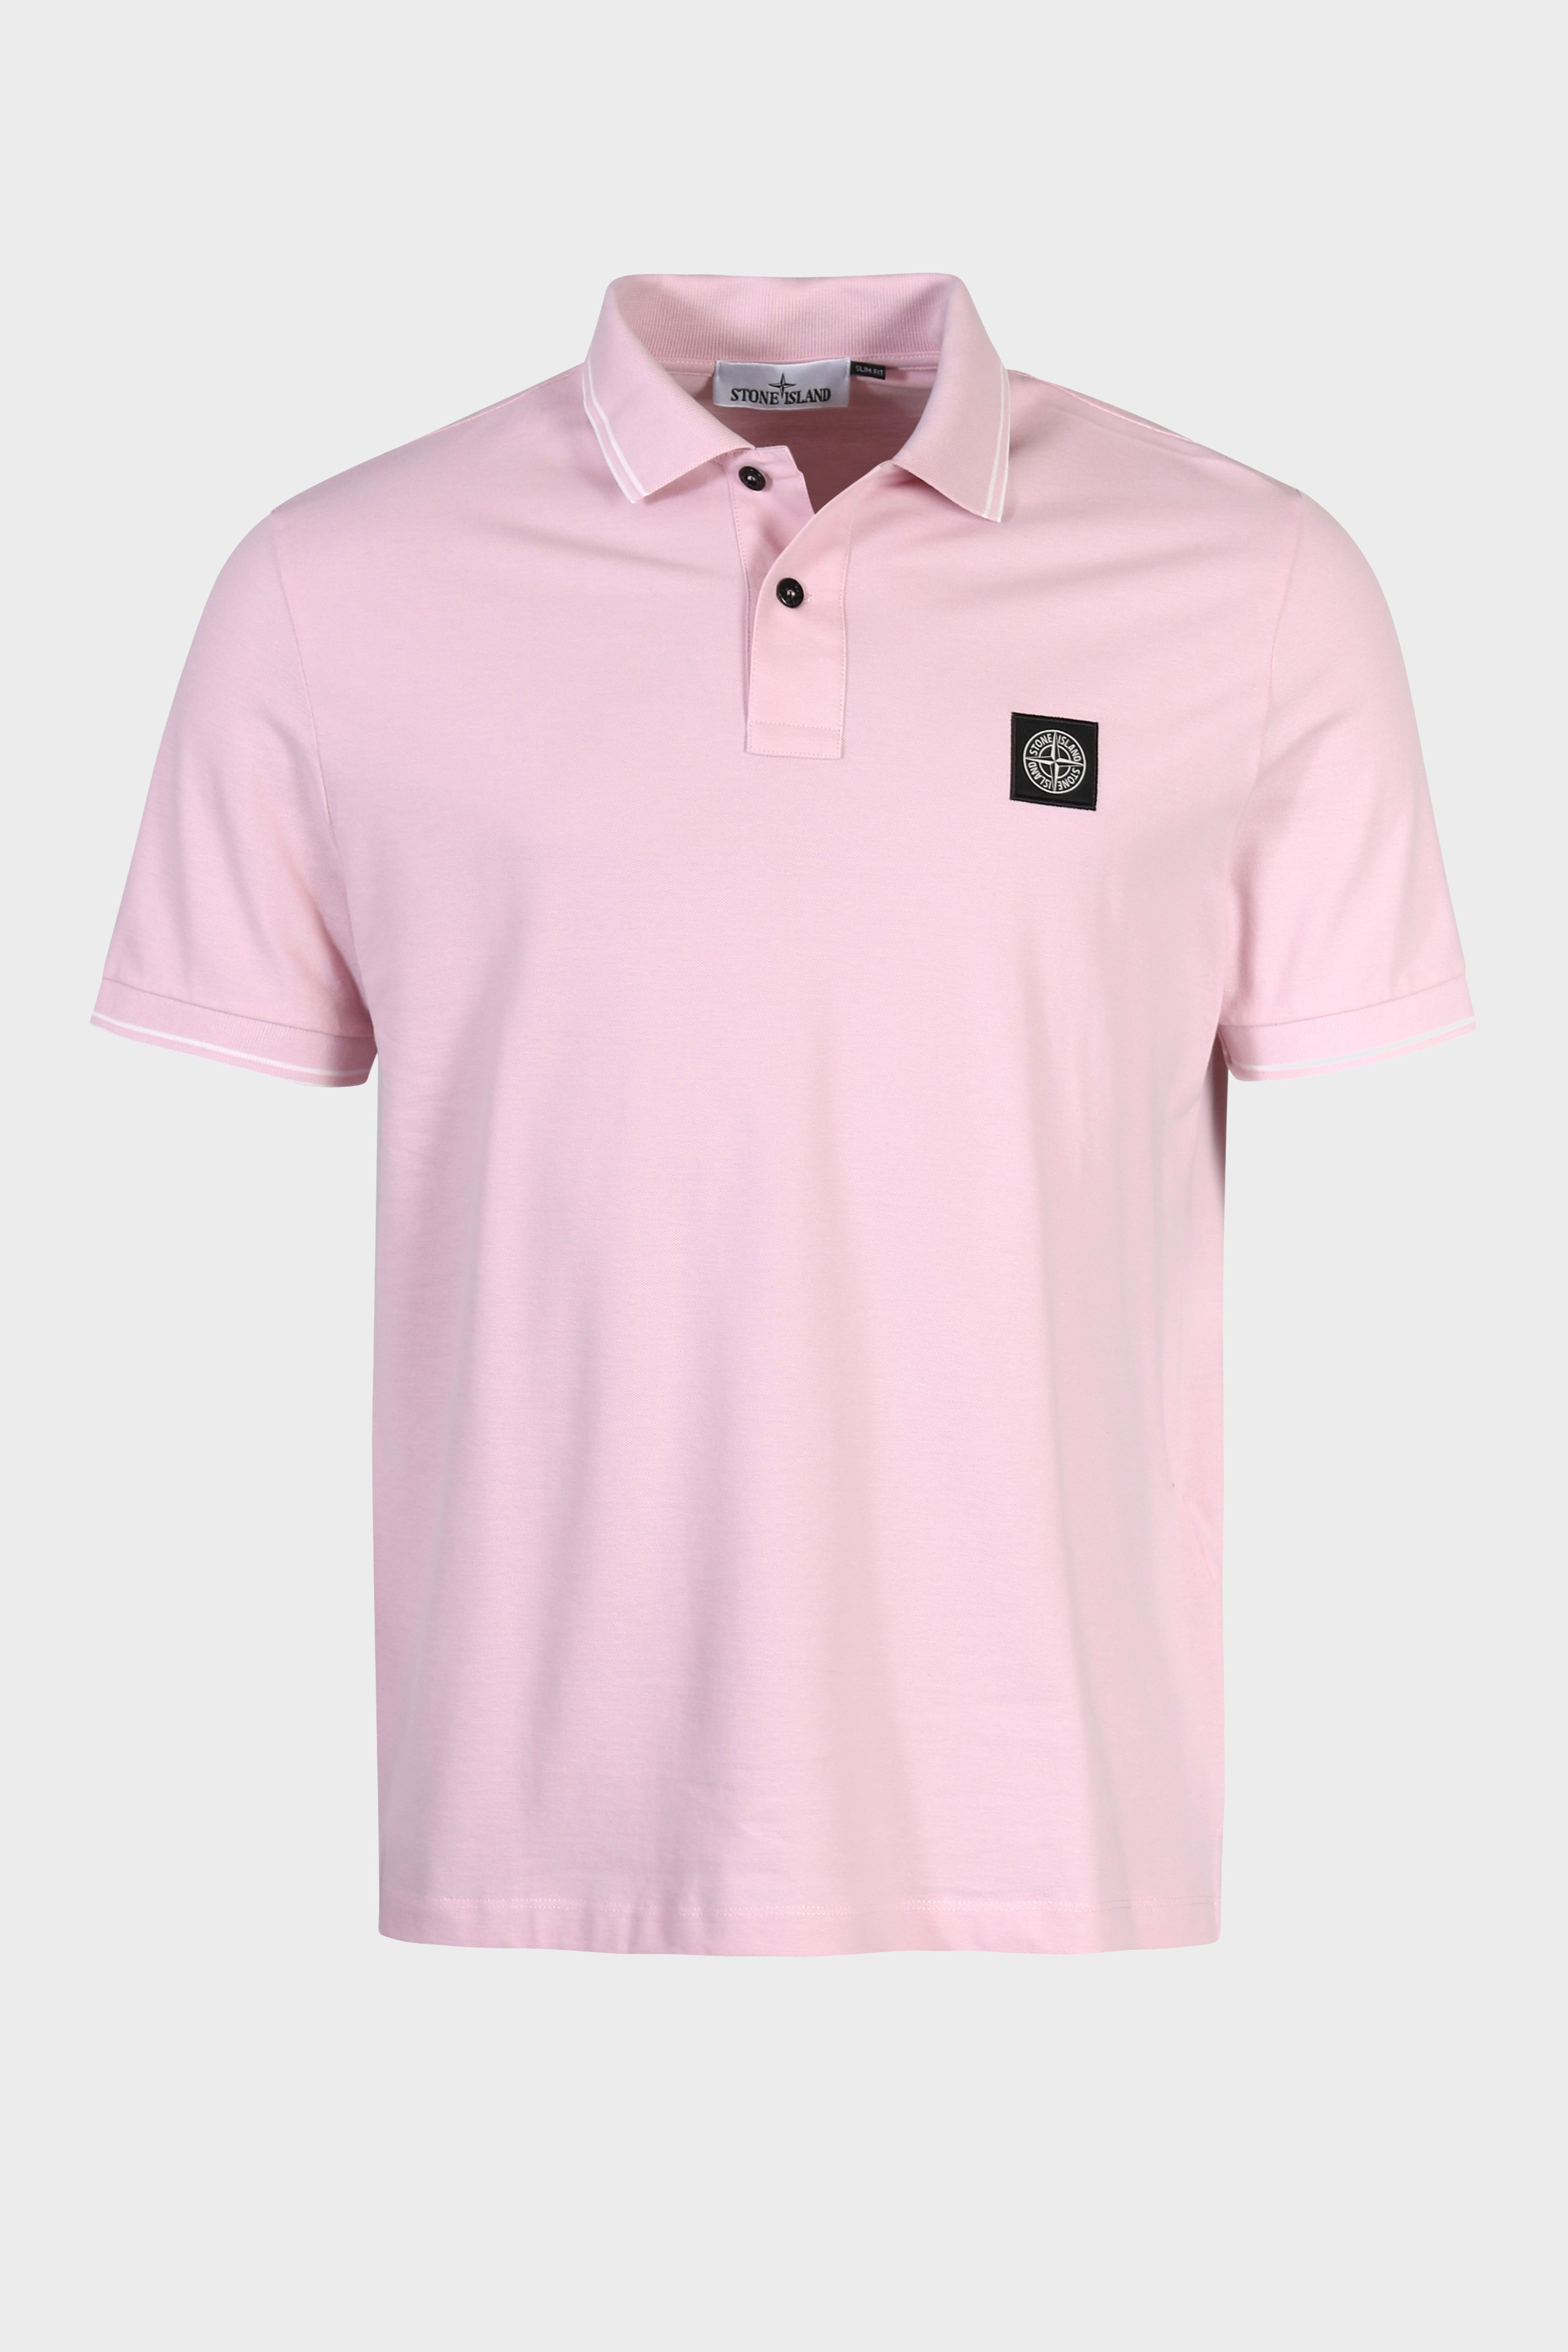 STONE ISLAND Slim Fit Polo Shirt in Light Pink